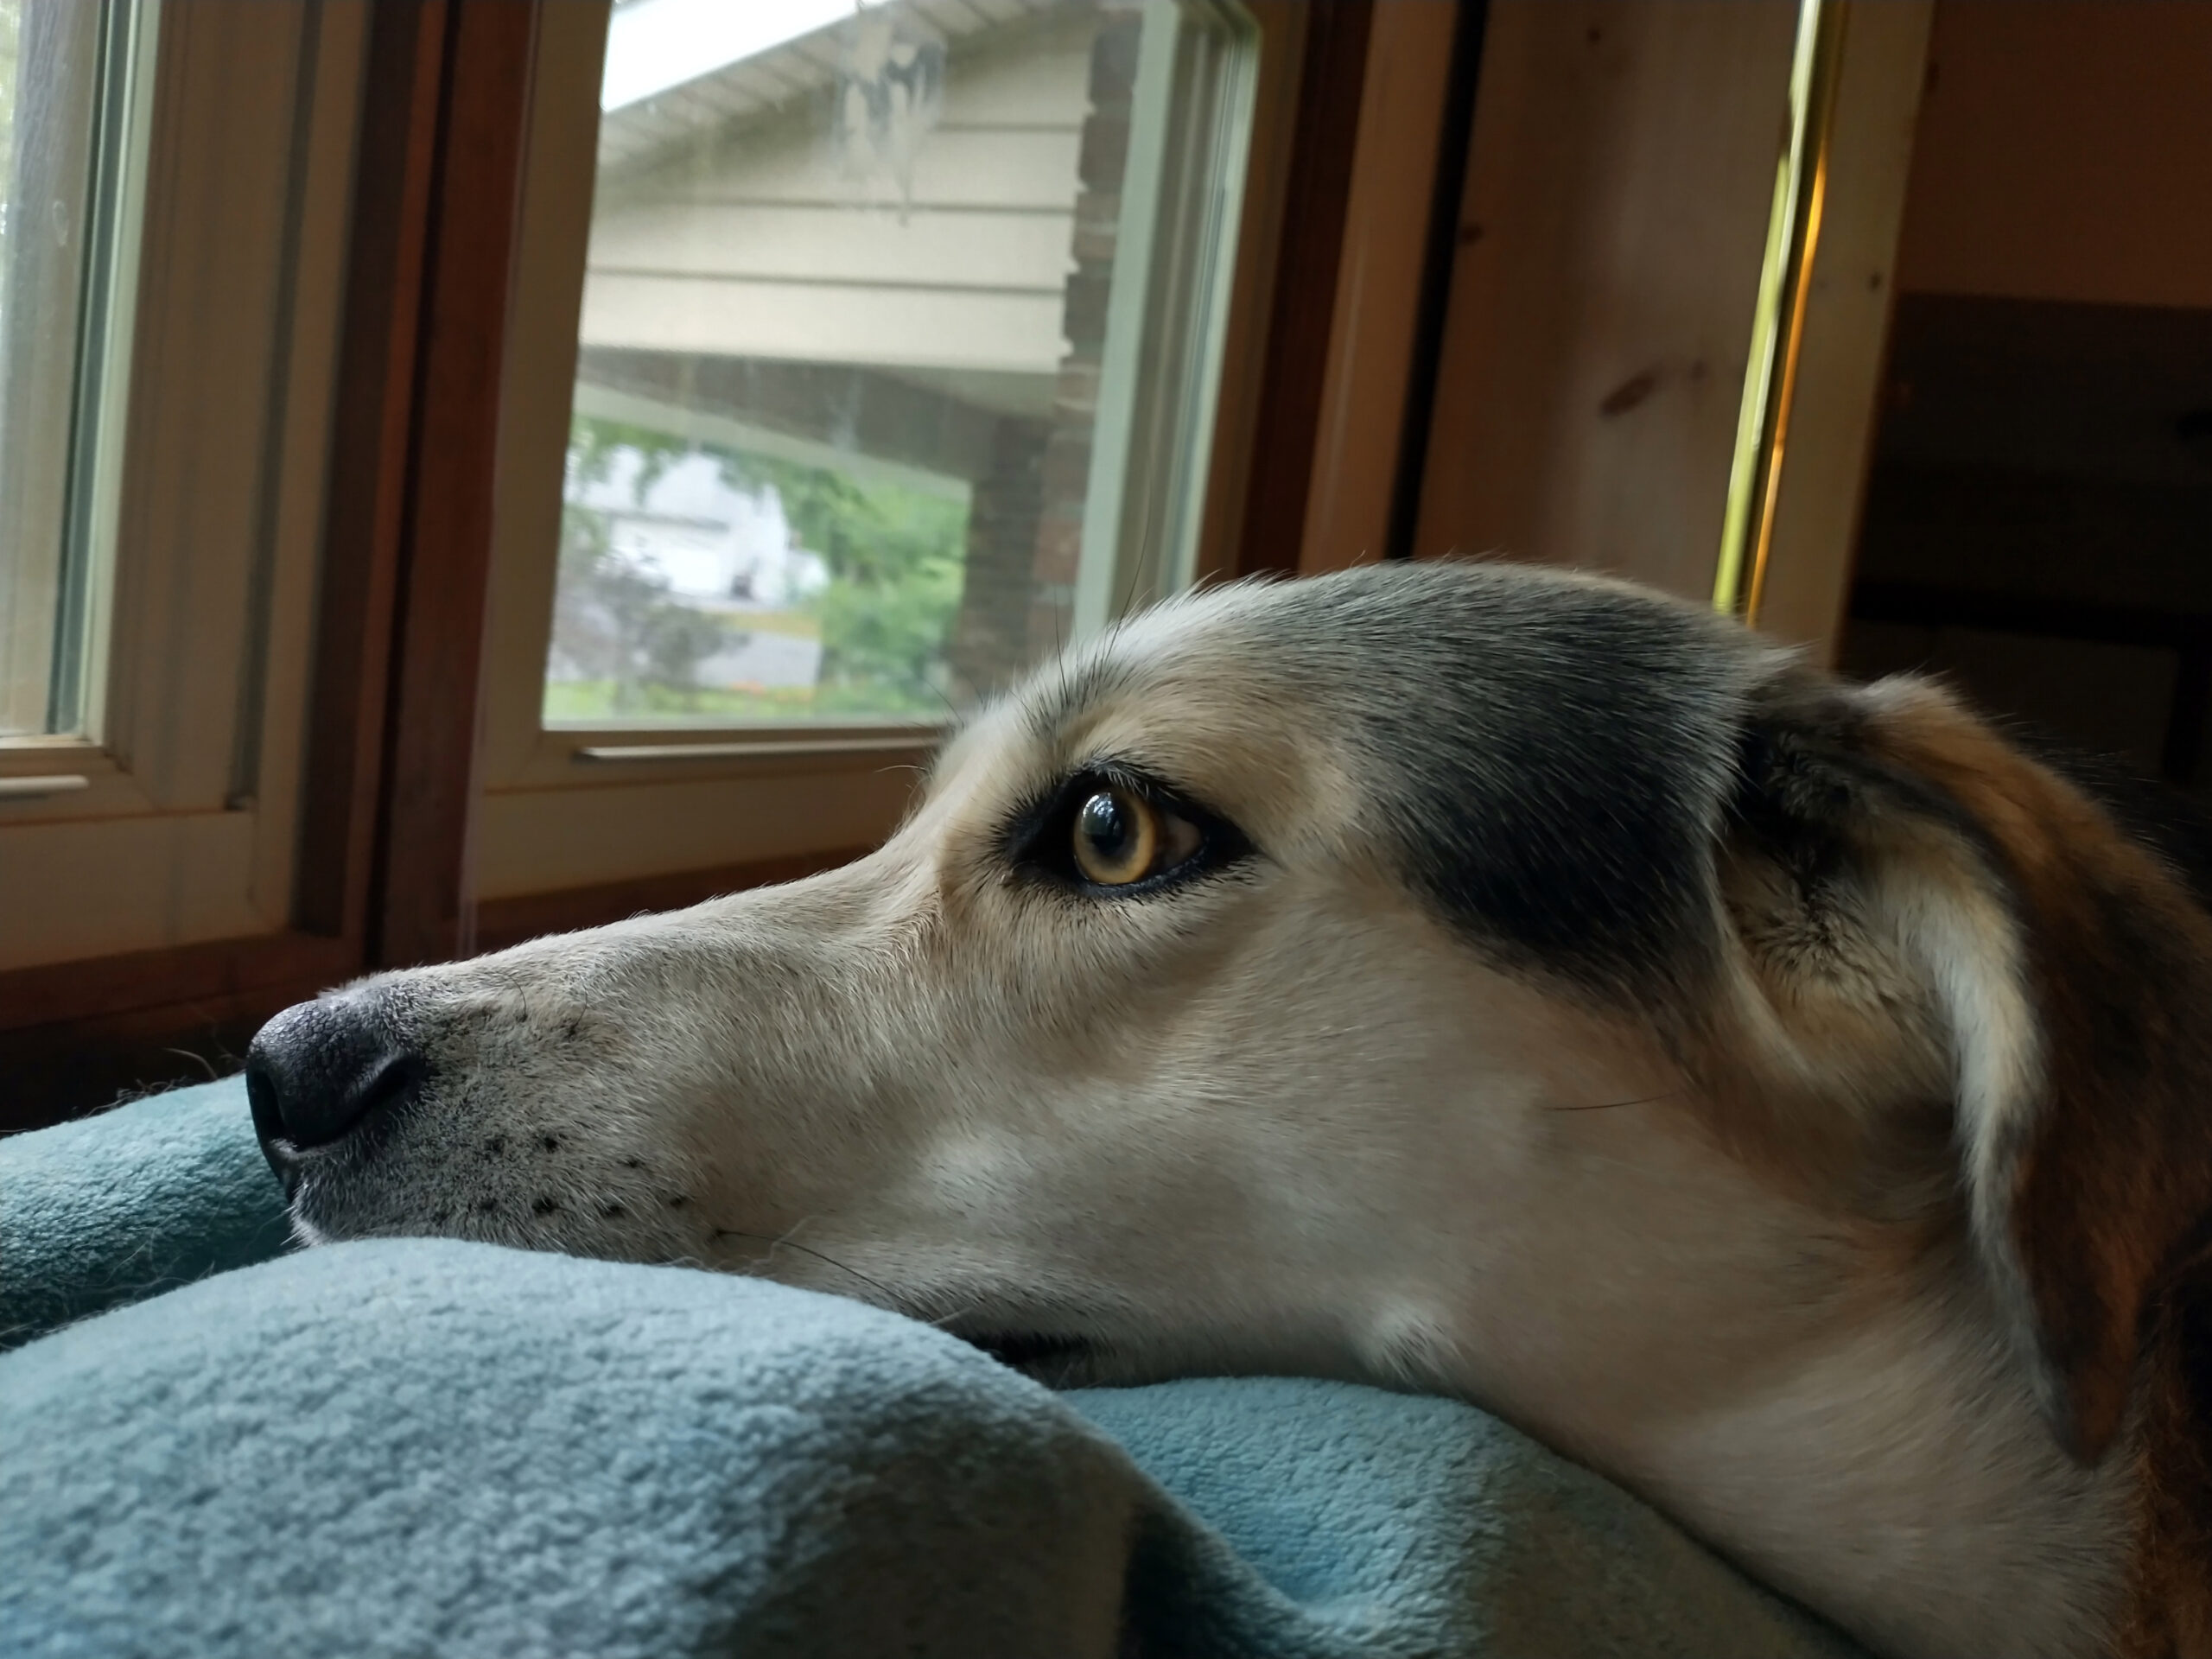 Sasha looking out the window